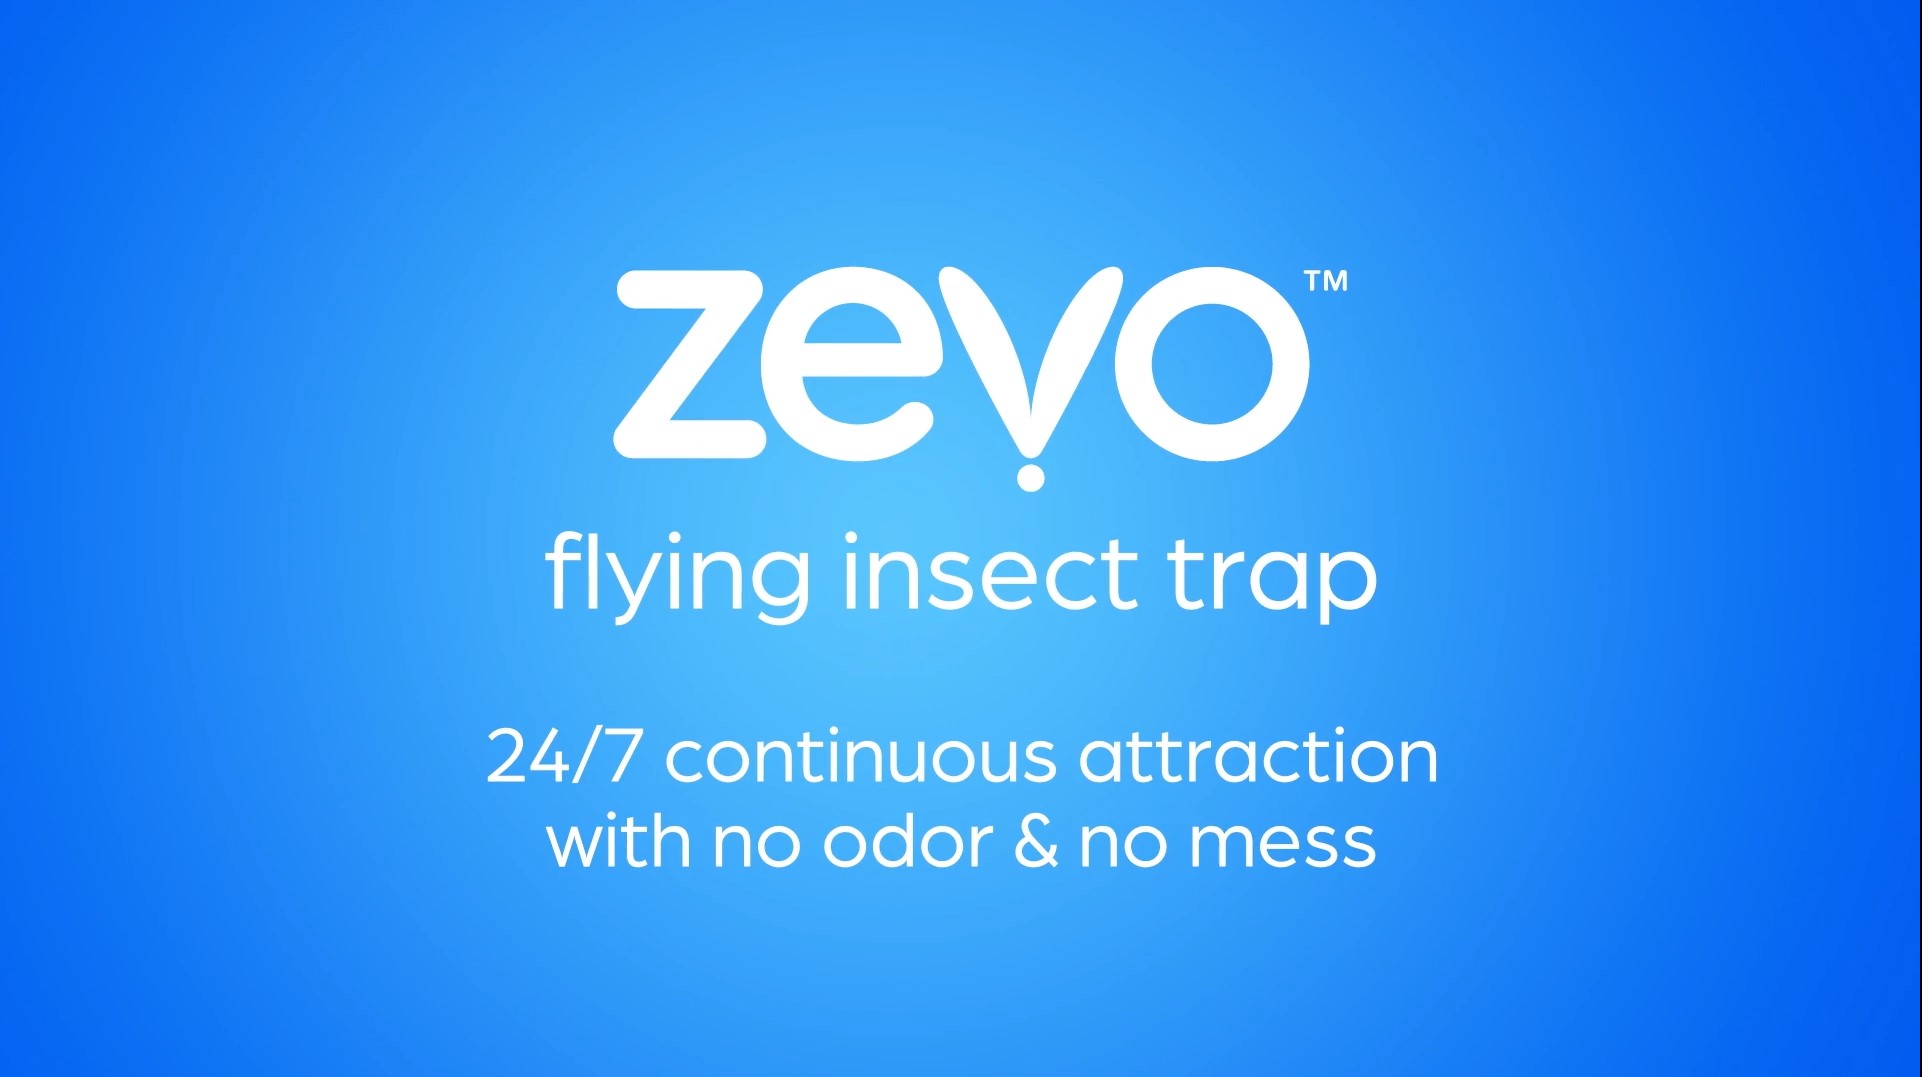 Bundle Zevo Flying Insect Trap Refill Kit NO Device - Model 3 2 -Pack (2)  Sold Separately, White (M364)